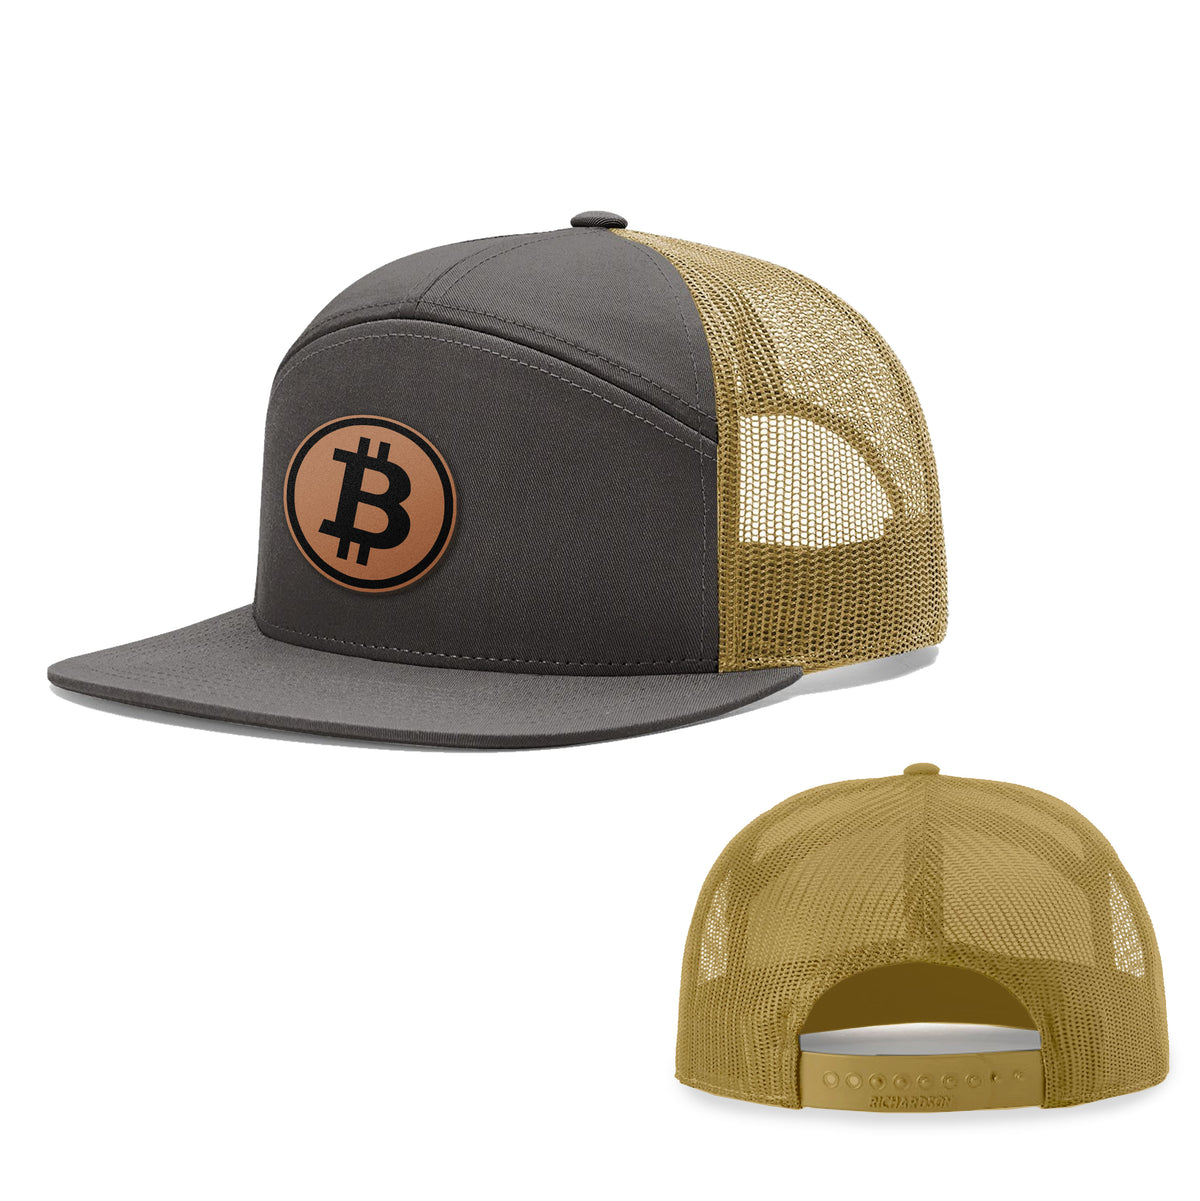 Bitcoin Leather Patch 7 Panel Hats